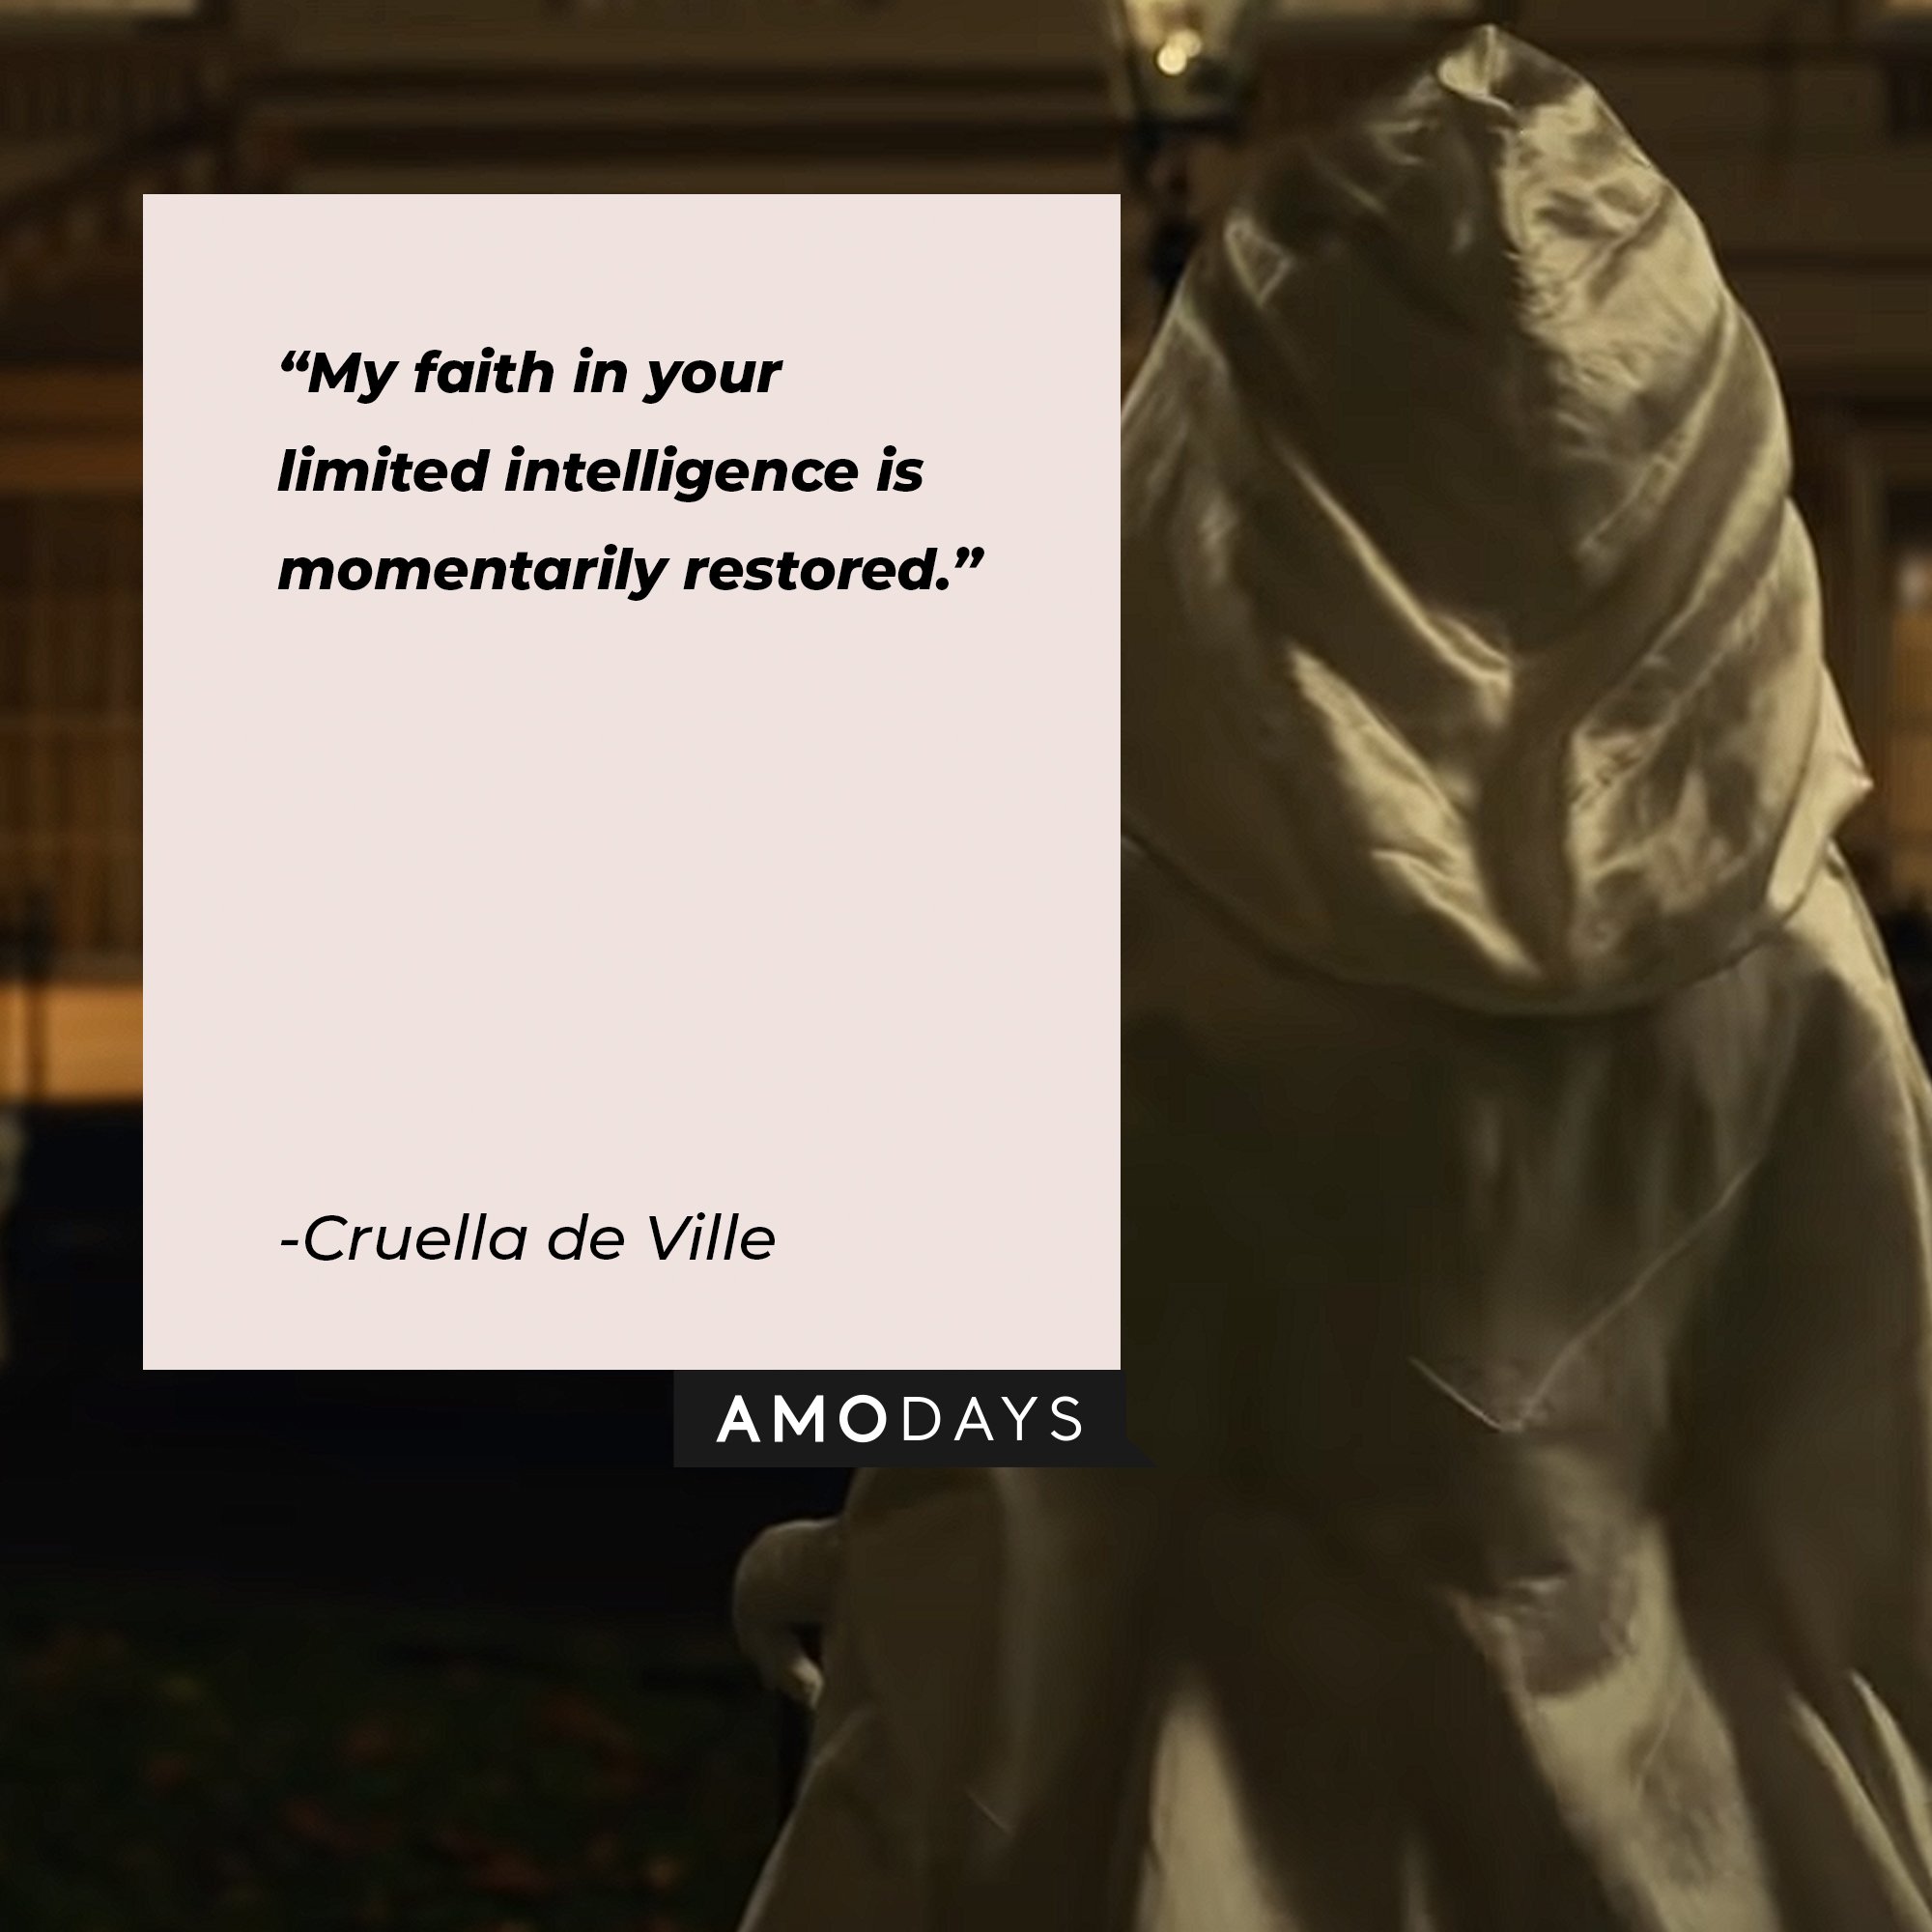 Cruella de Ville’s quote: "My faith in your limited intelligence is momentarily restored.” | Image: AmoDays